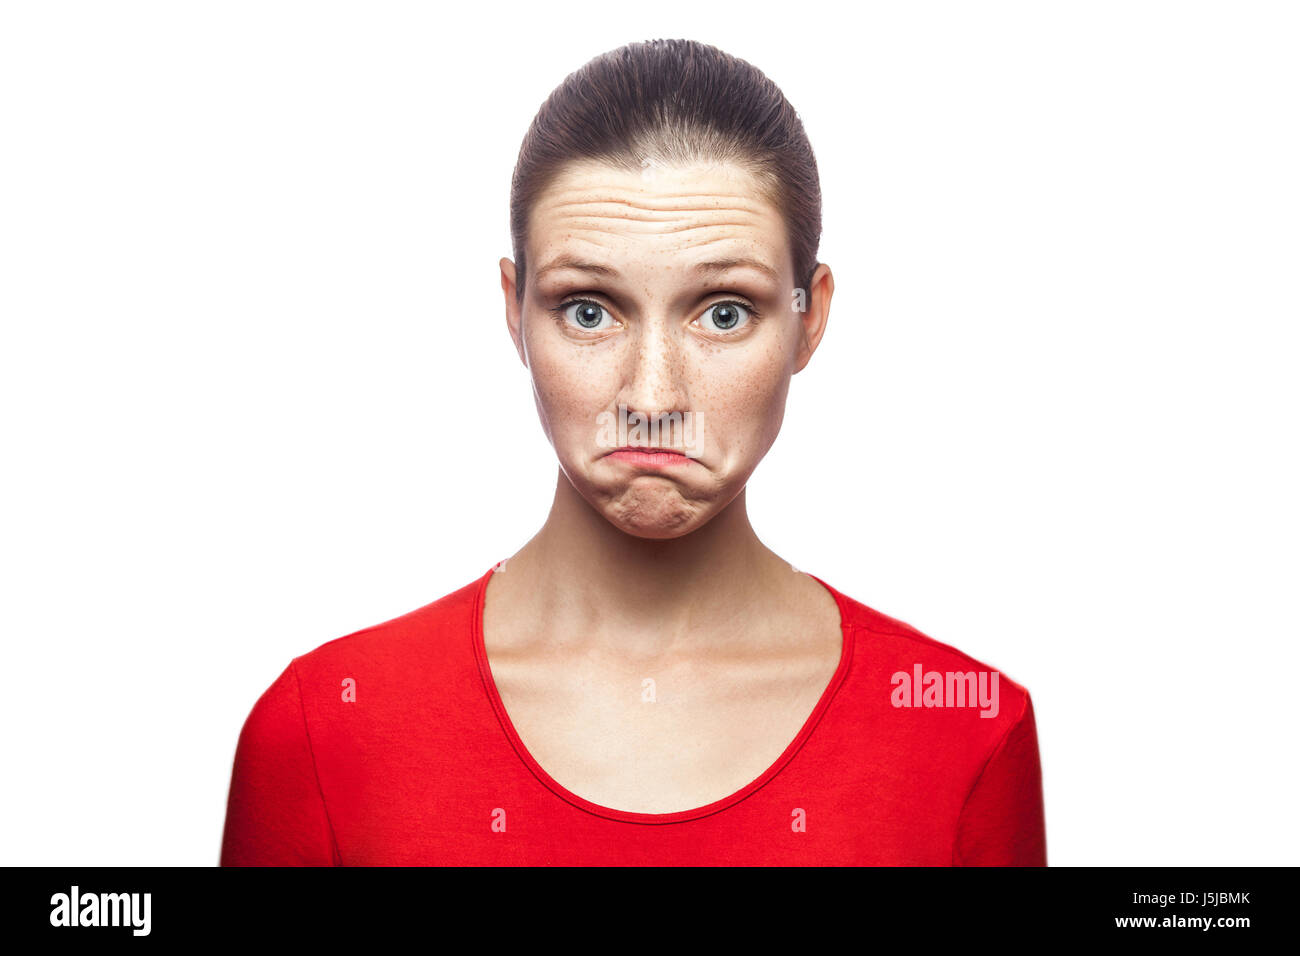 I don't know. portrait of funny confused woman in red t-shirt with freckles. looking at camera, studio shot. isolated on white background. Stock Photo